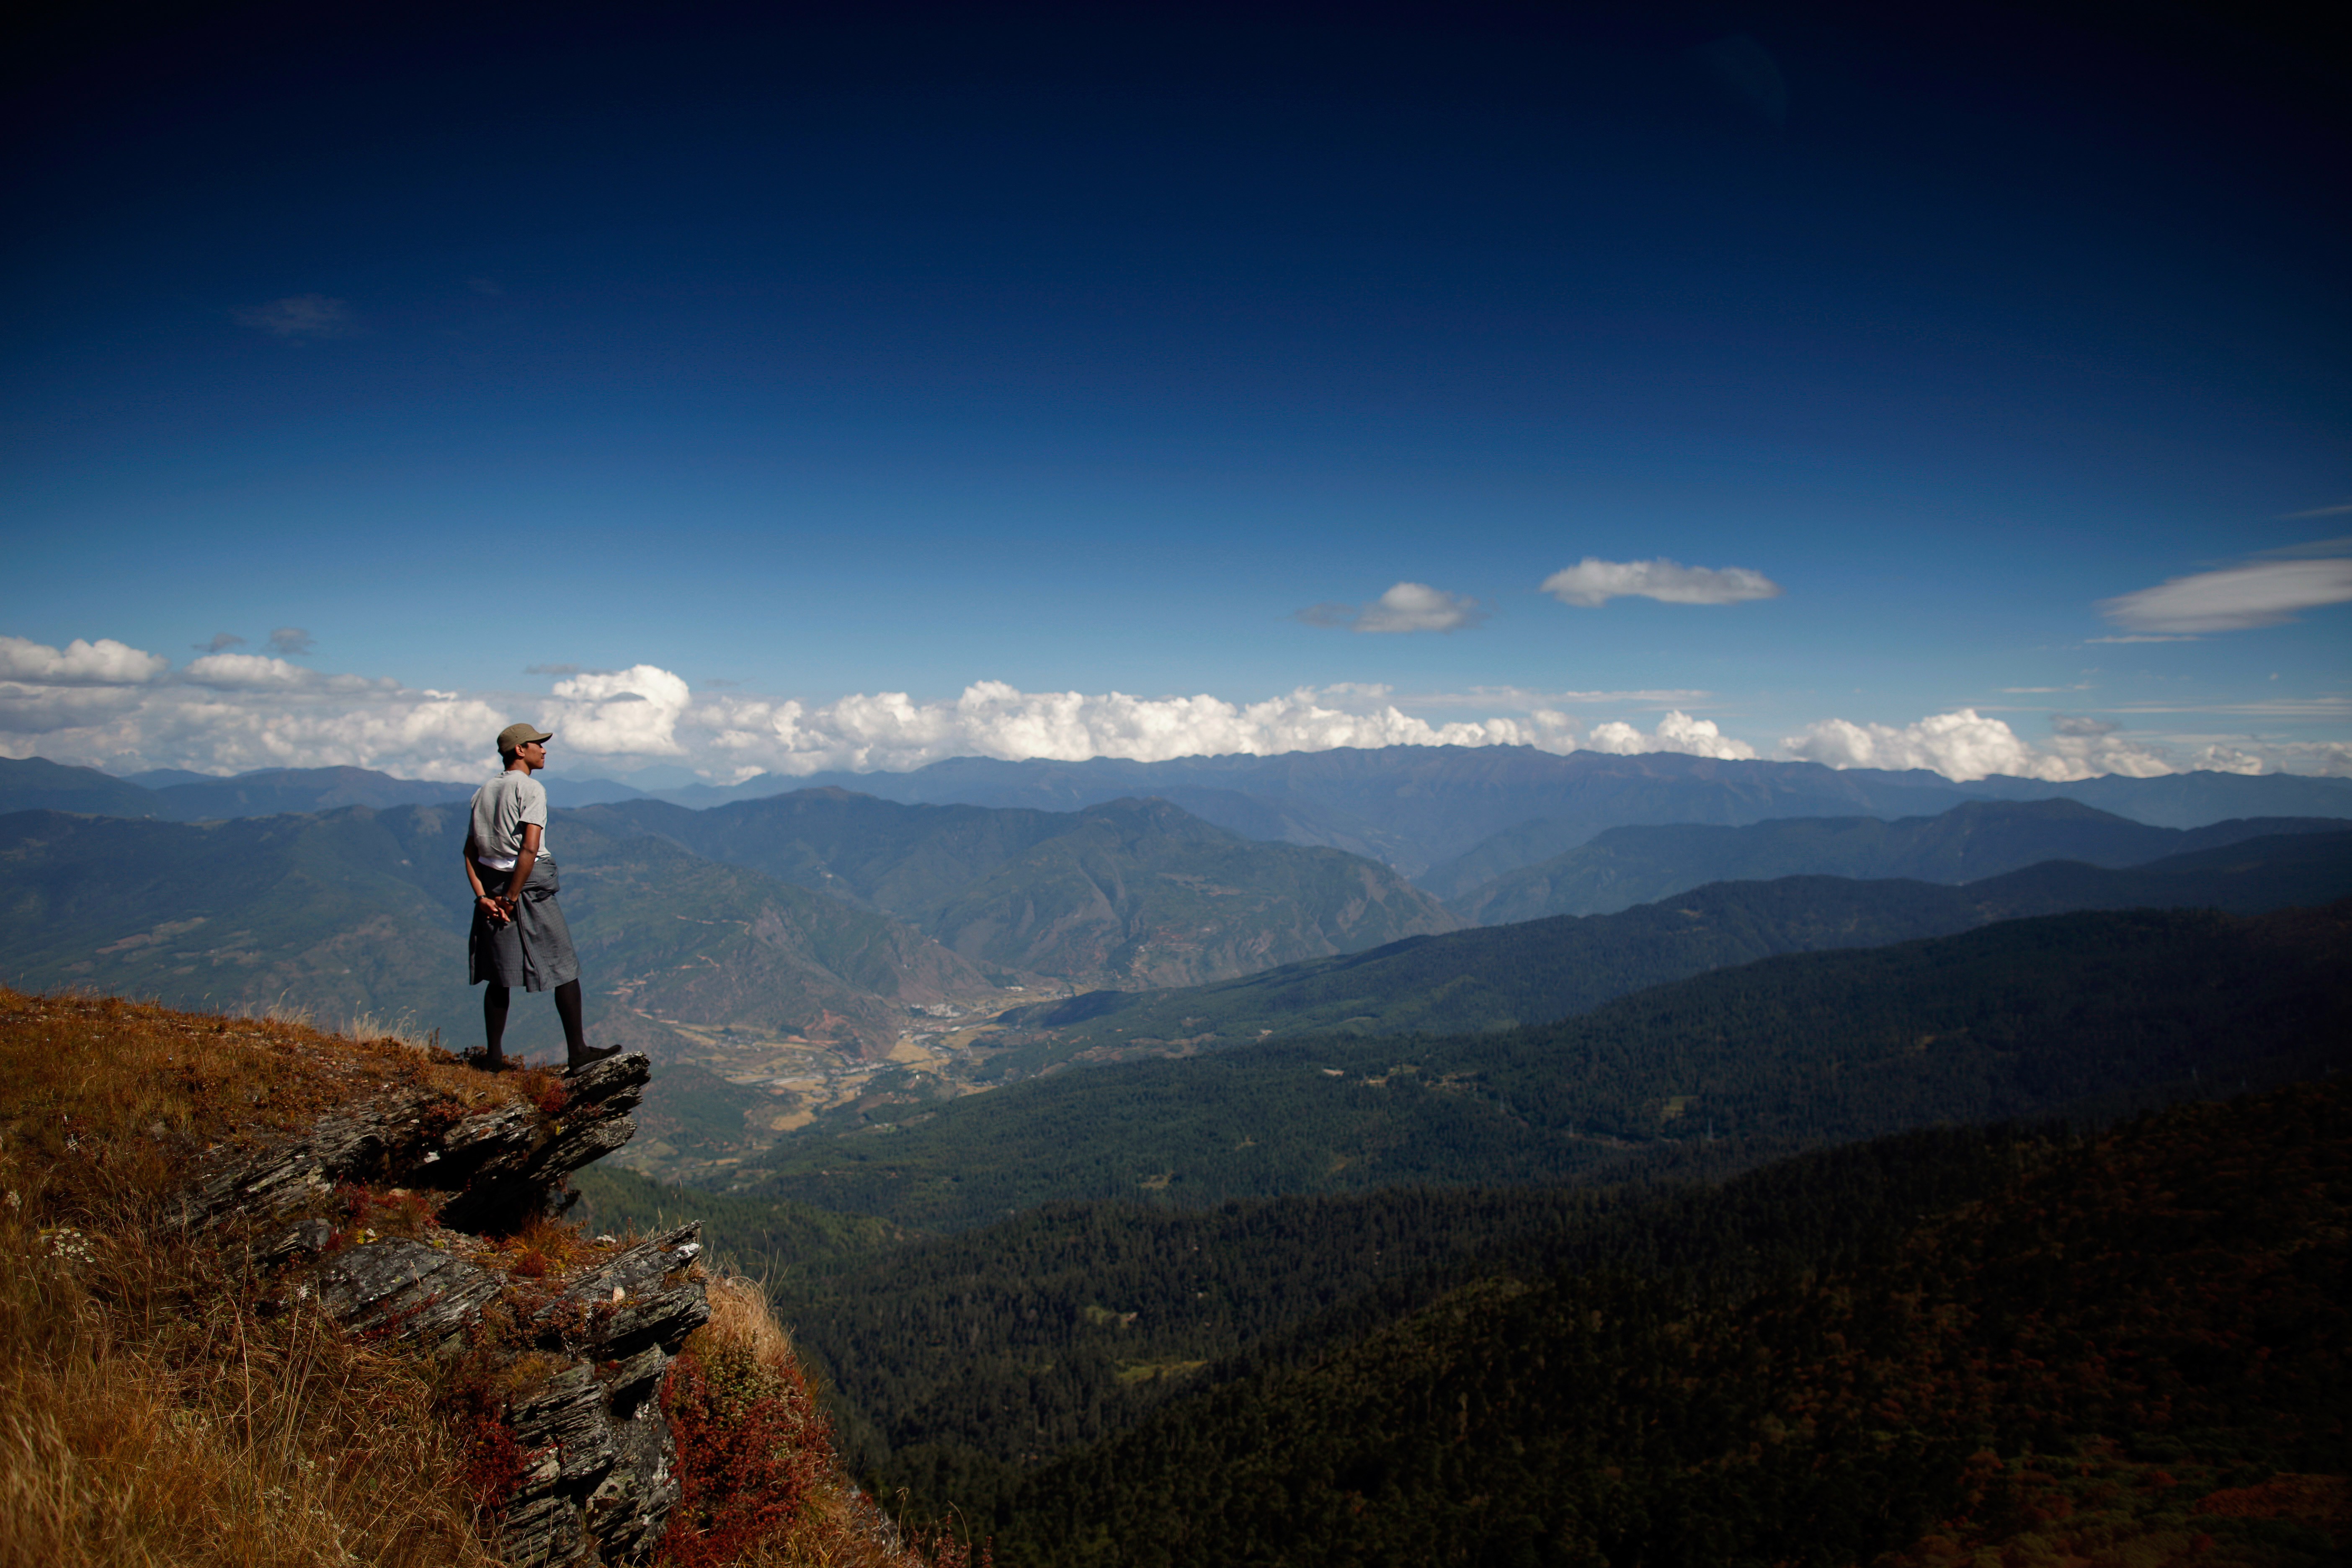 A man looks towards the Paro valley, near the Chele La pass situated between the Bhutanese valleys of Paro and Haa. Many in the Indian media and officials have been propagating a misleading message that Bhutan is a “protectorate” of India. Bhutan has never been a “protectorate”. Photo: AFP